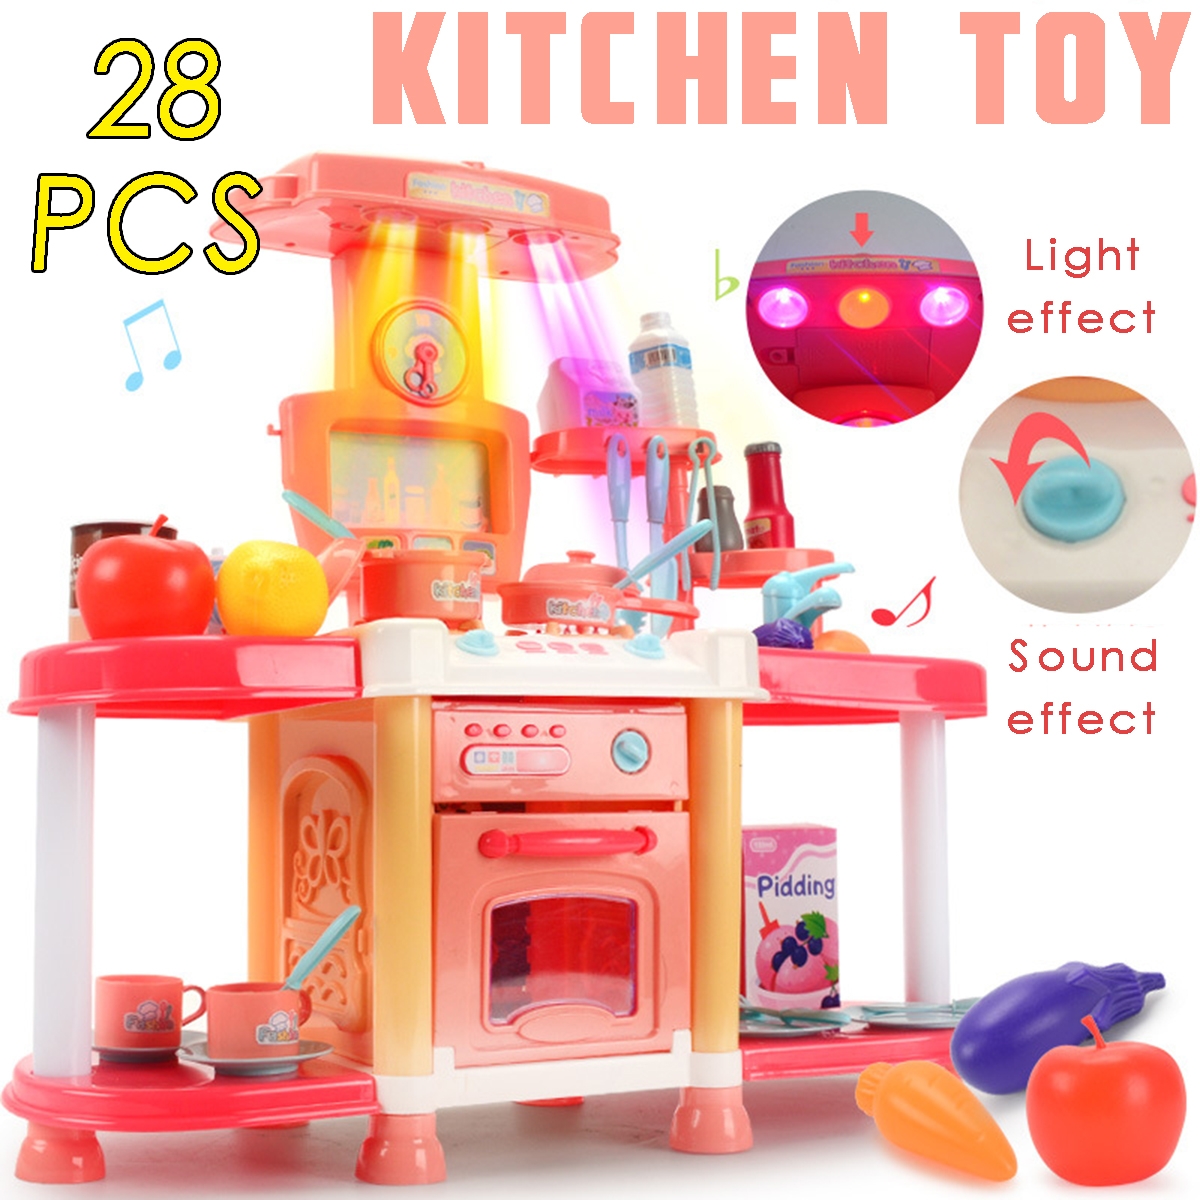 Children's Playhouse Kitchen Toy Set Sound And Light Sound Effects Girls Cook And Cook Utensils